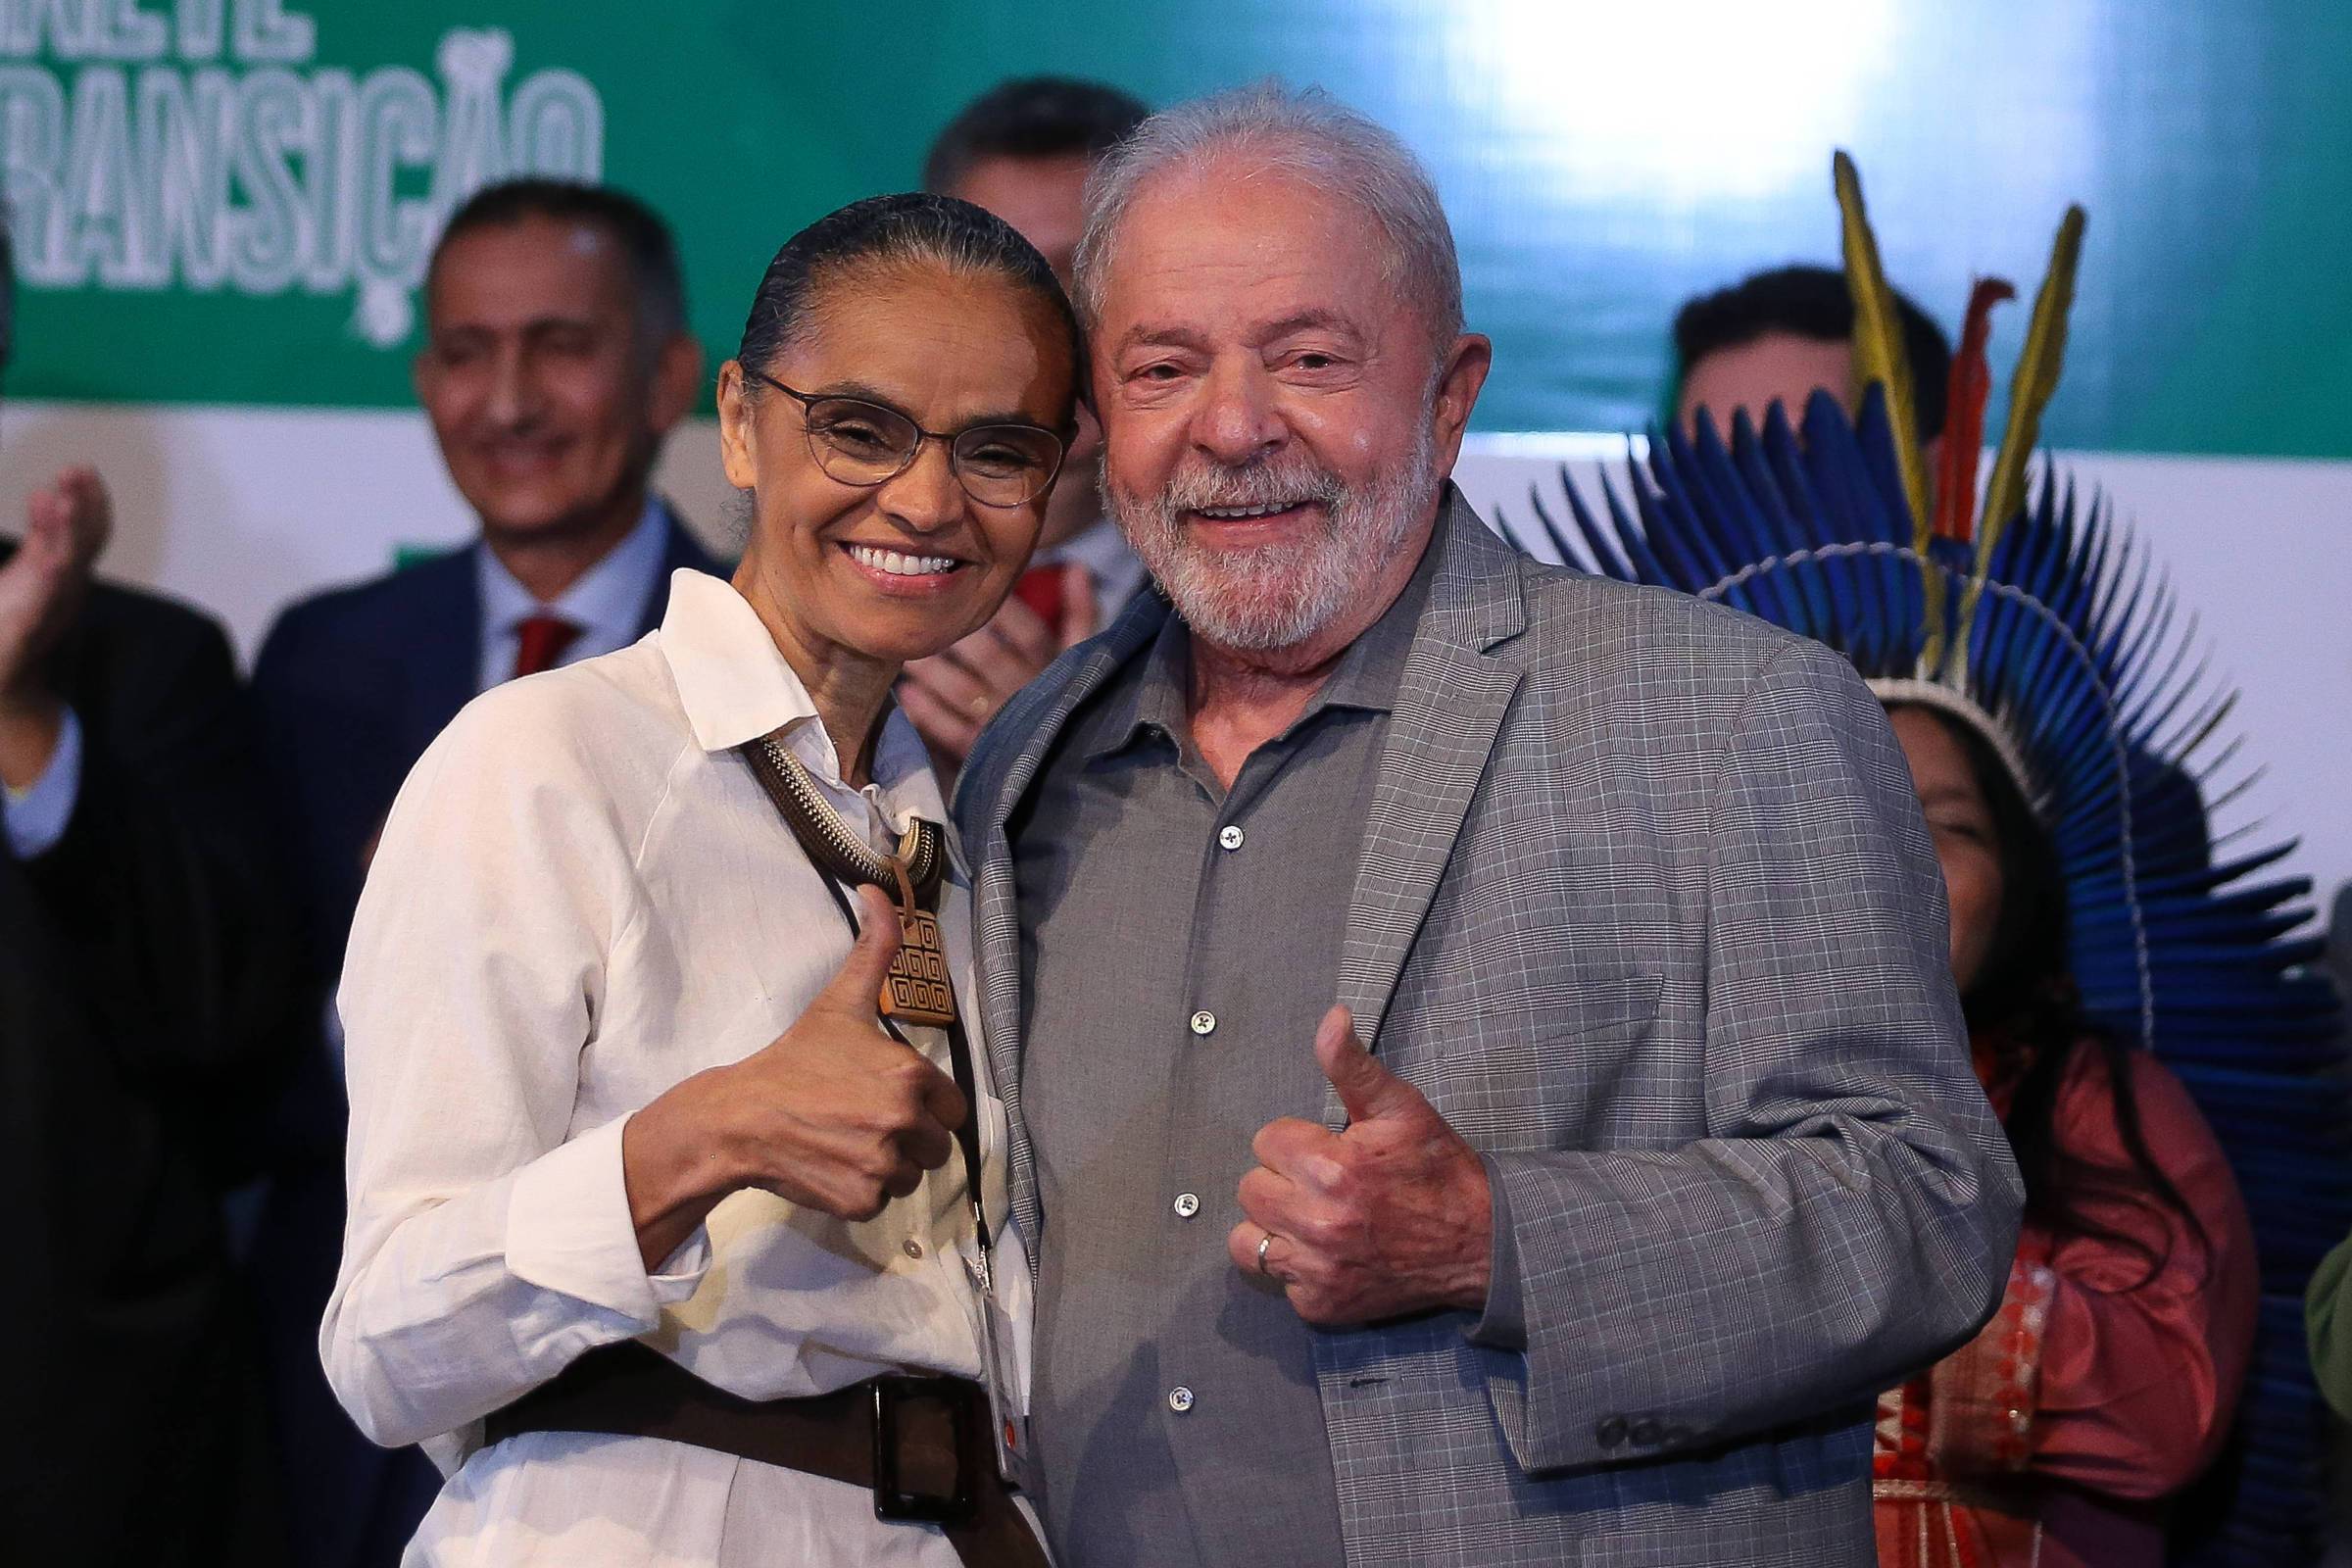 Marina Silva: in 7 points, the resignation in 2008 under Lula – 05/24/2023 – Power